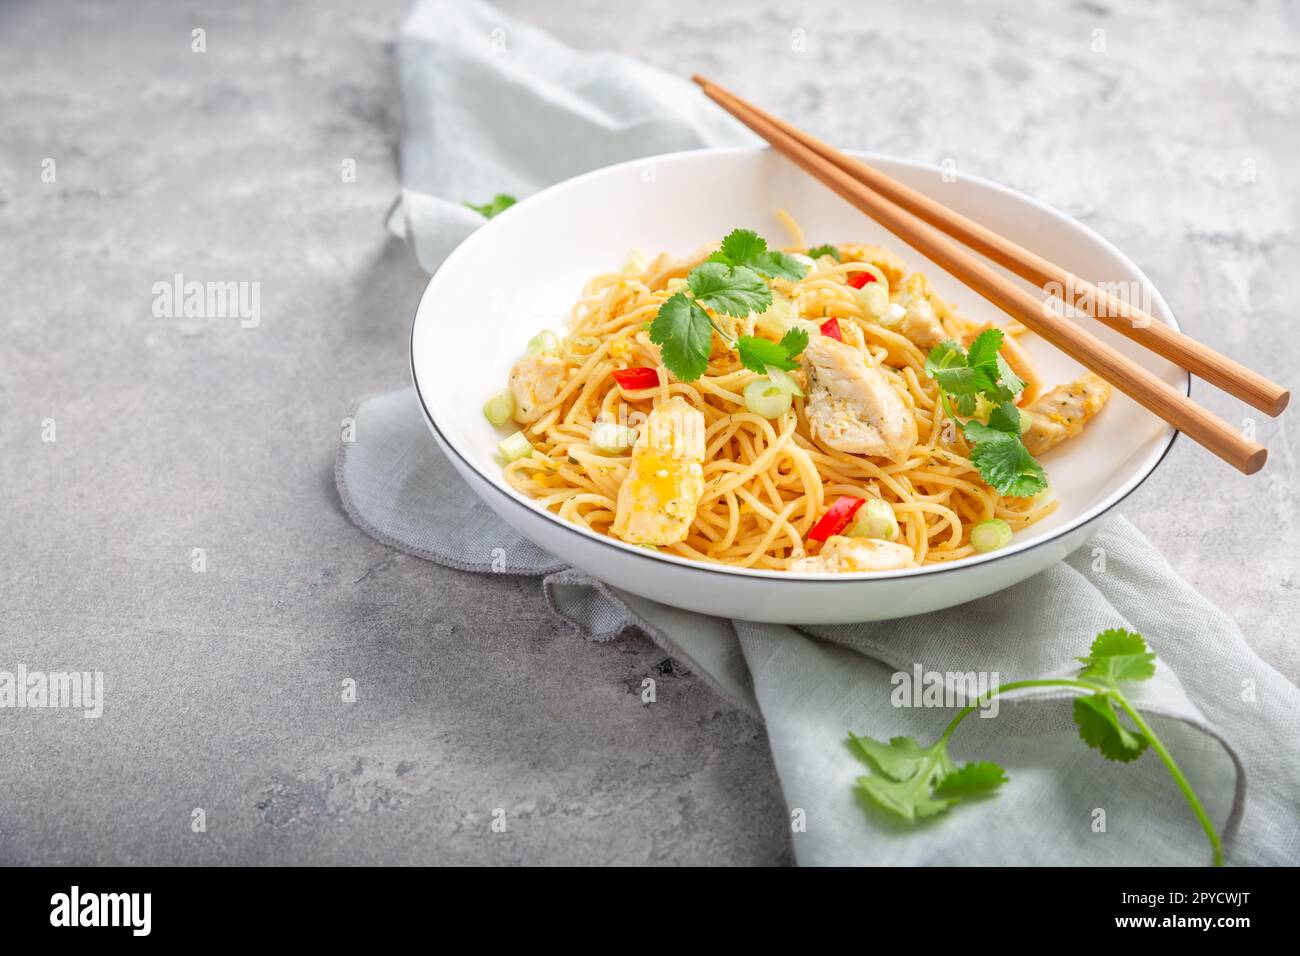 Stir fried noodles with chicken and vegetable in white bowl Stock Photo